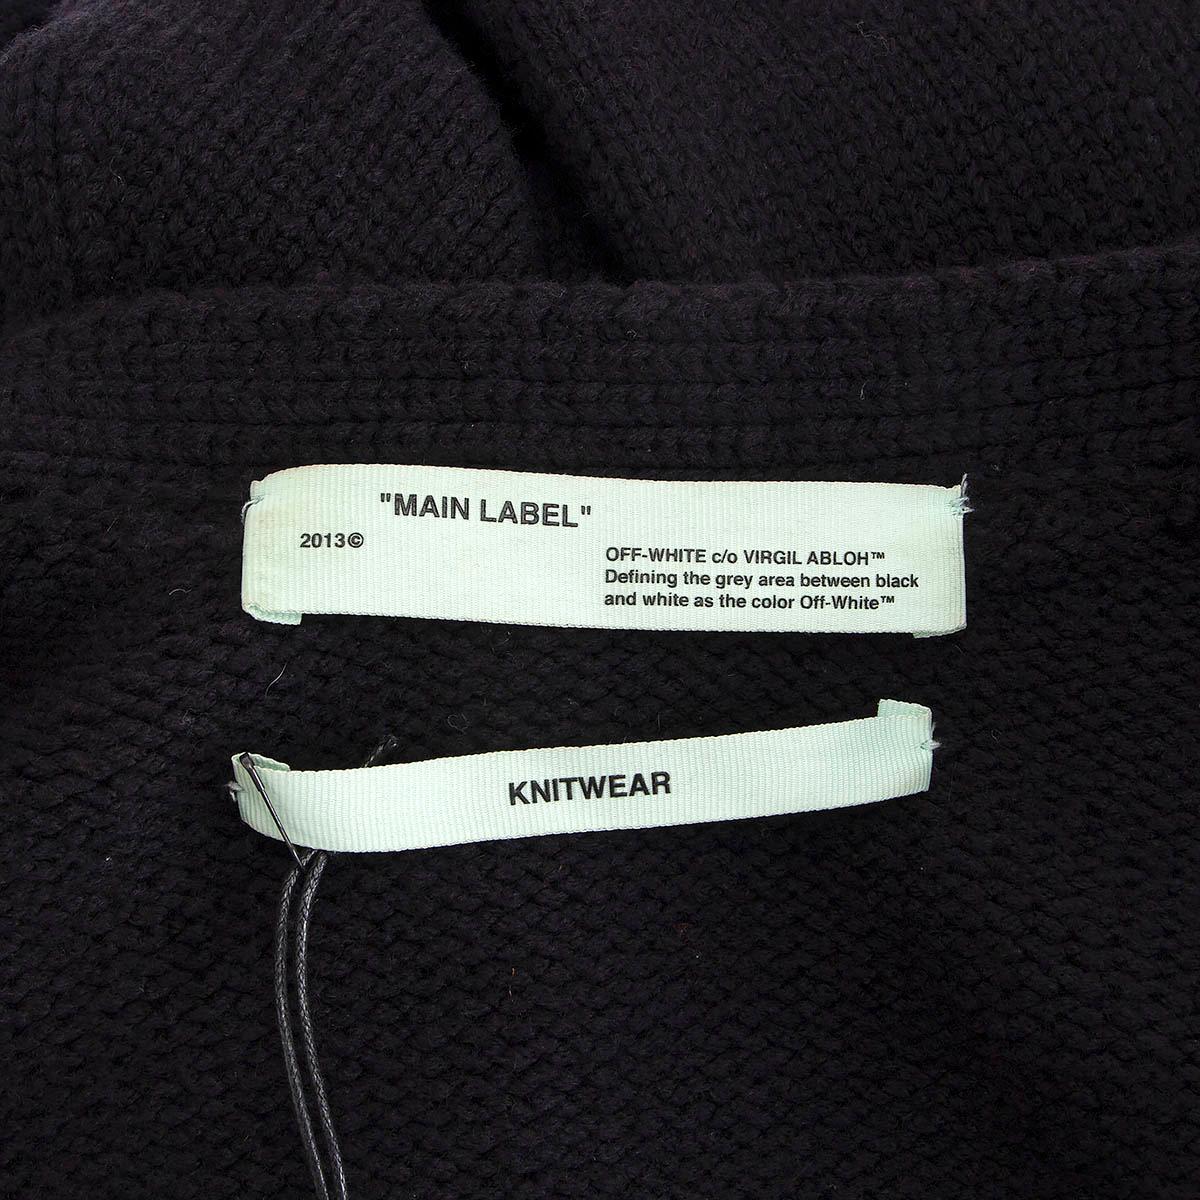 OFF-WHITE c/o VIRGIL ABLOH black wool 2013 POCKET Cardigan Sweater 40 M In Excellent Condition For Sale In Zürich, CH